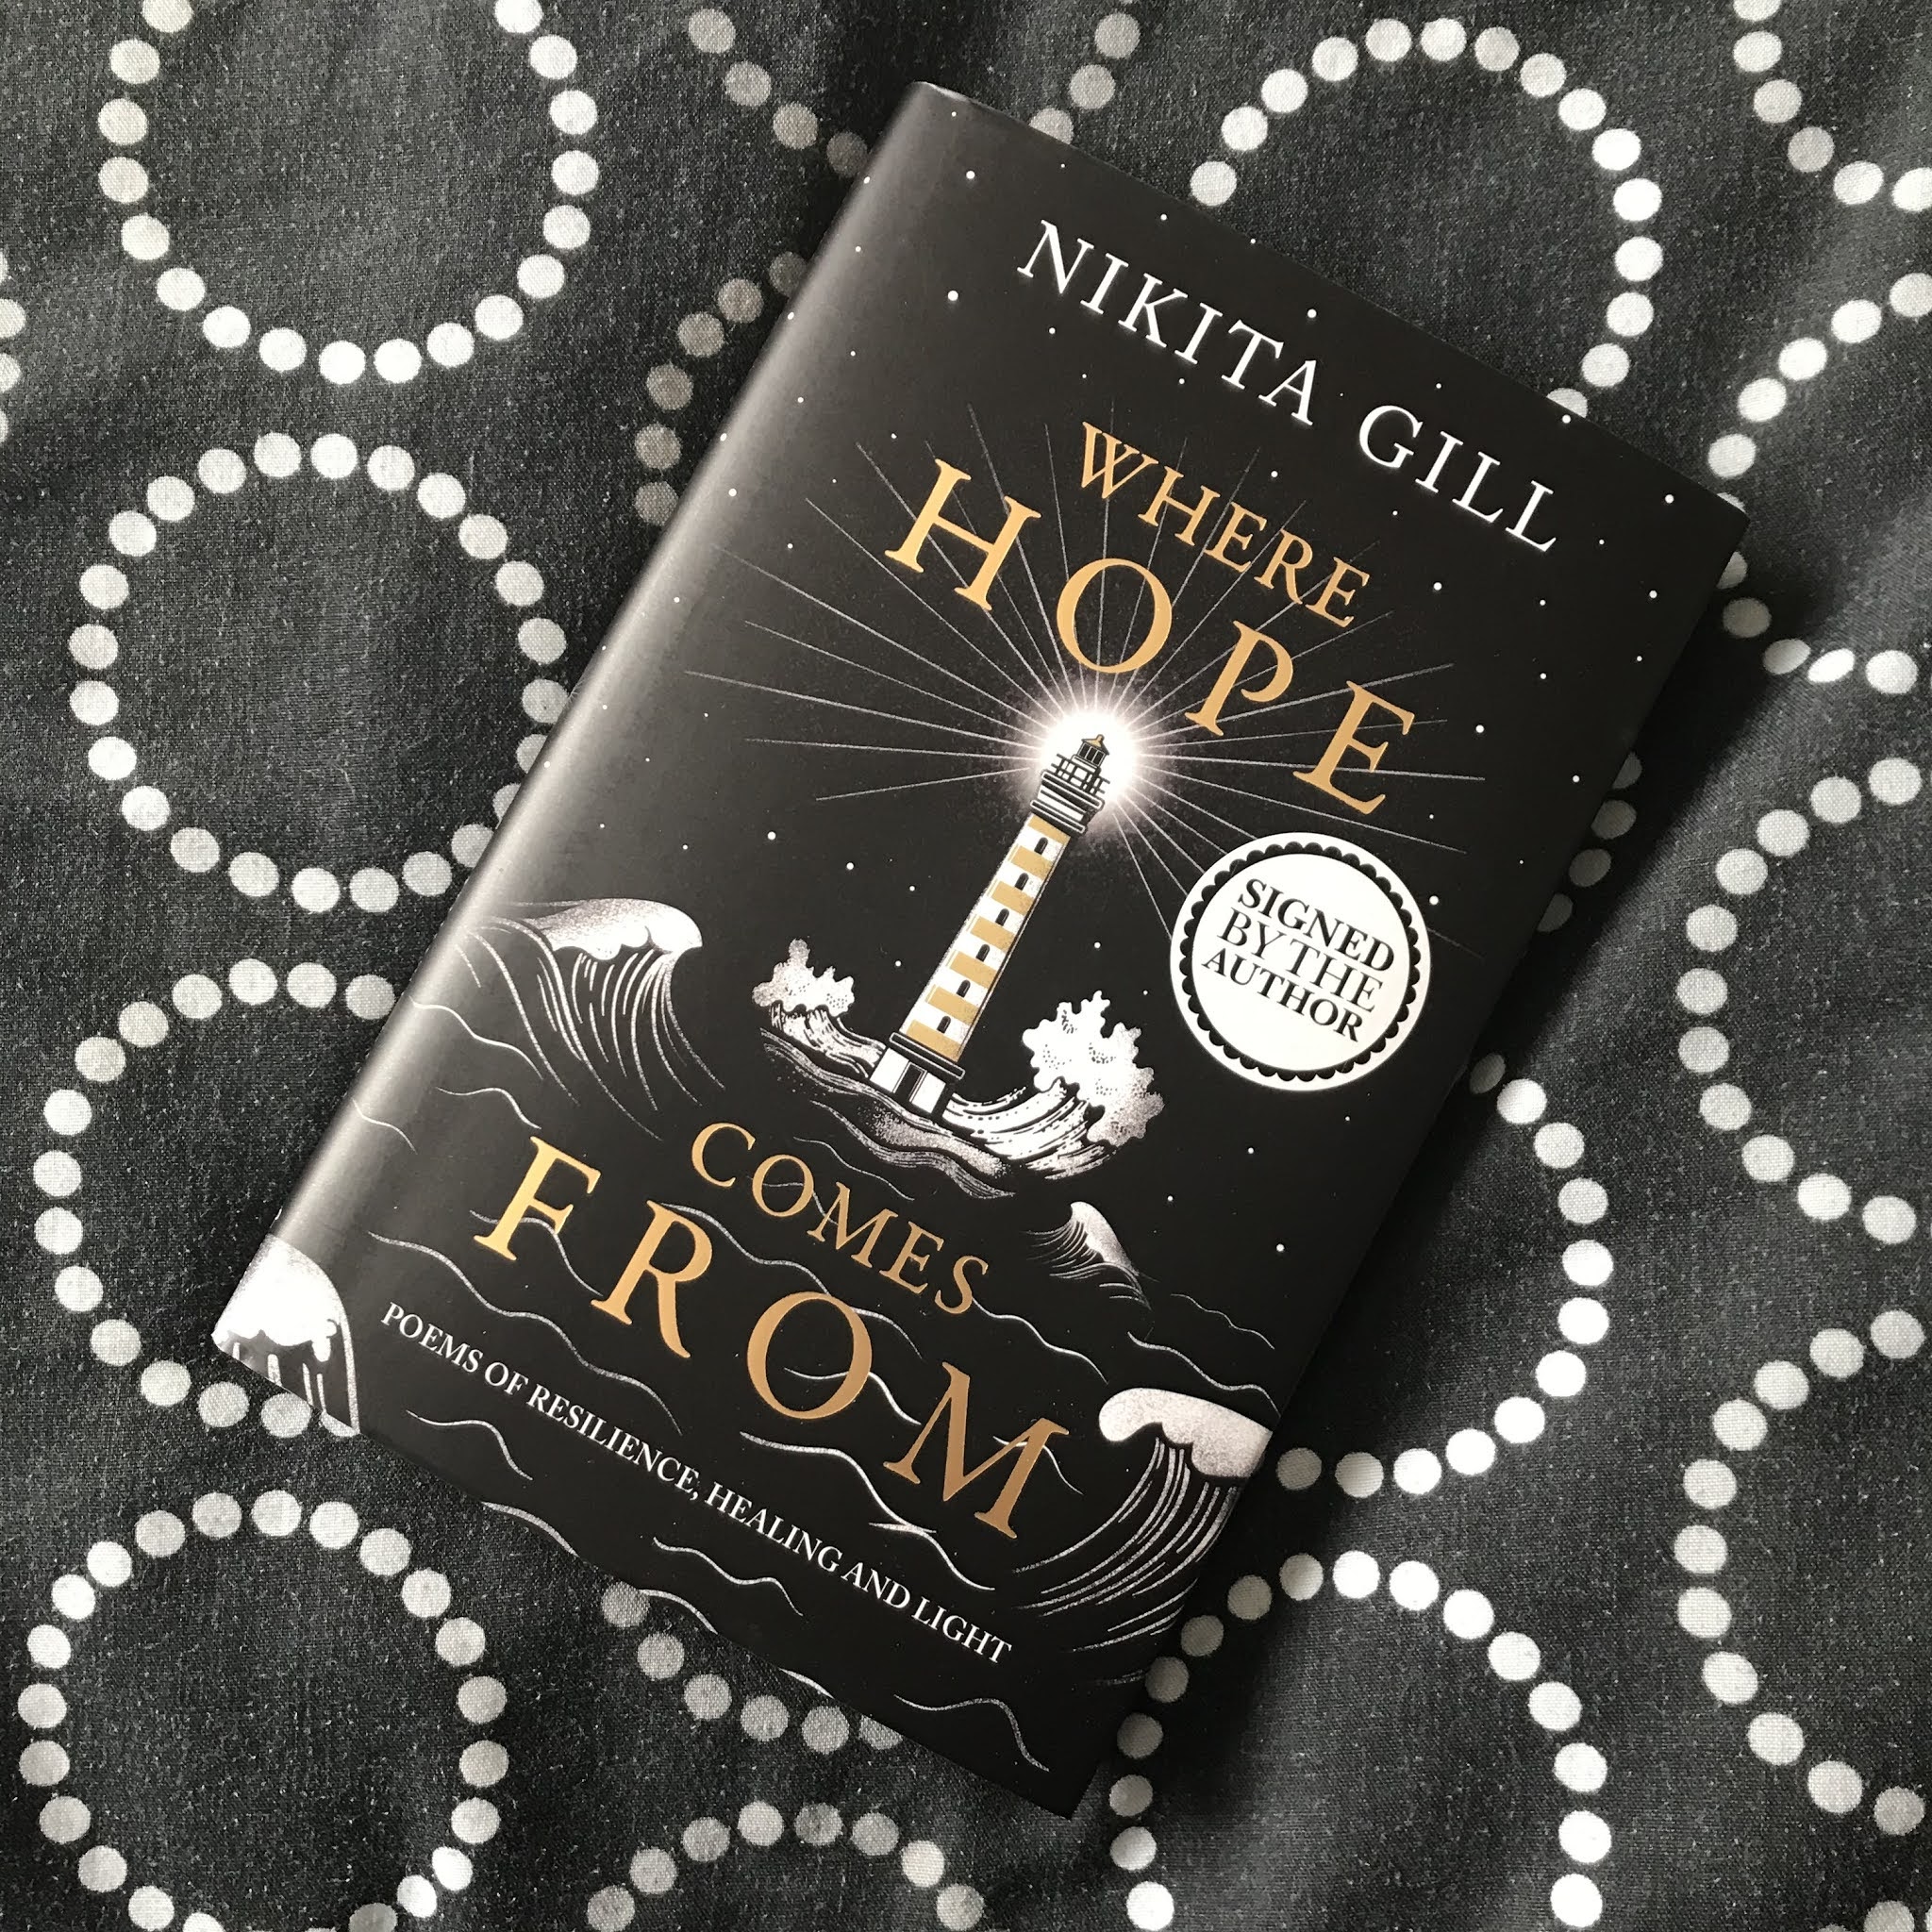 here Hope Comes From by Nikita Gill